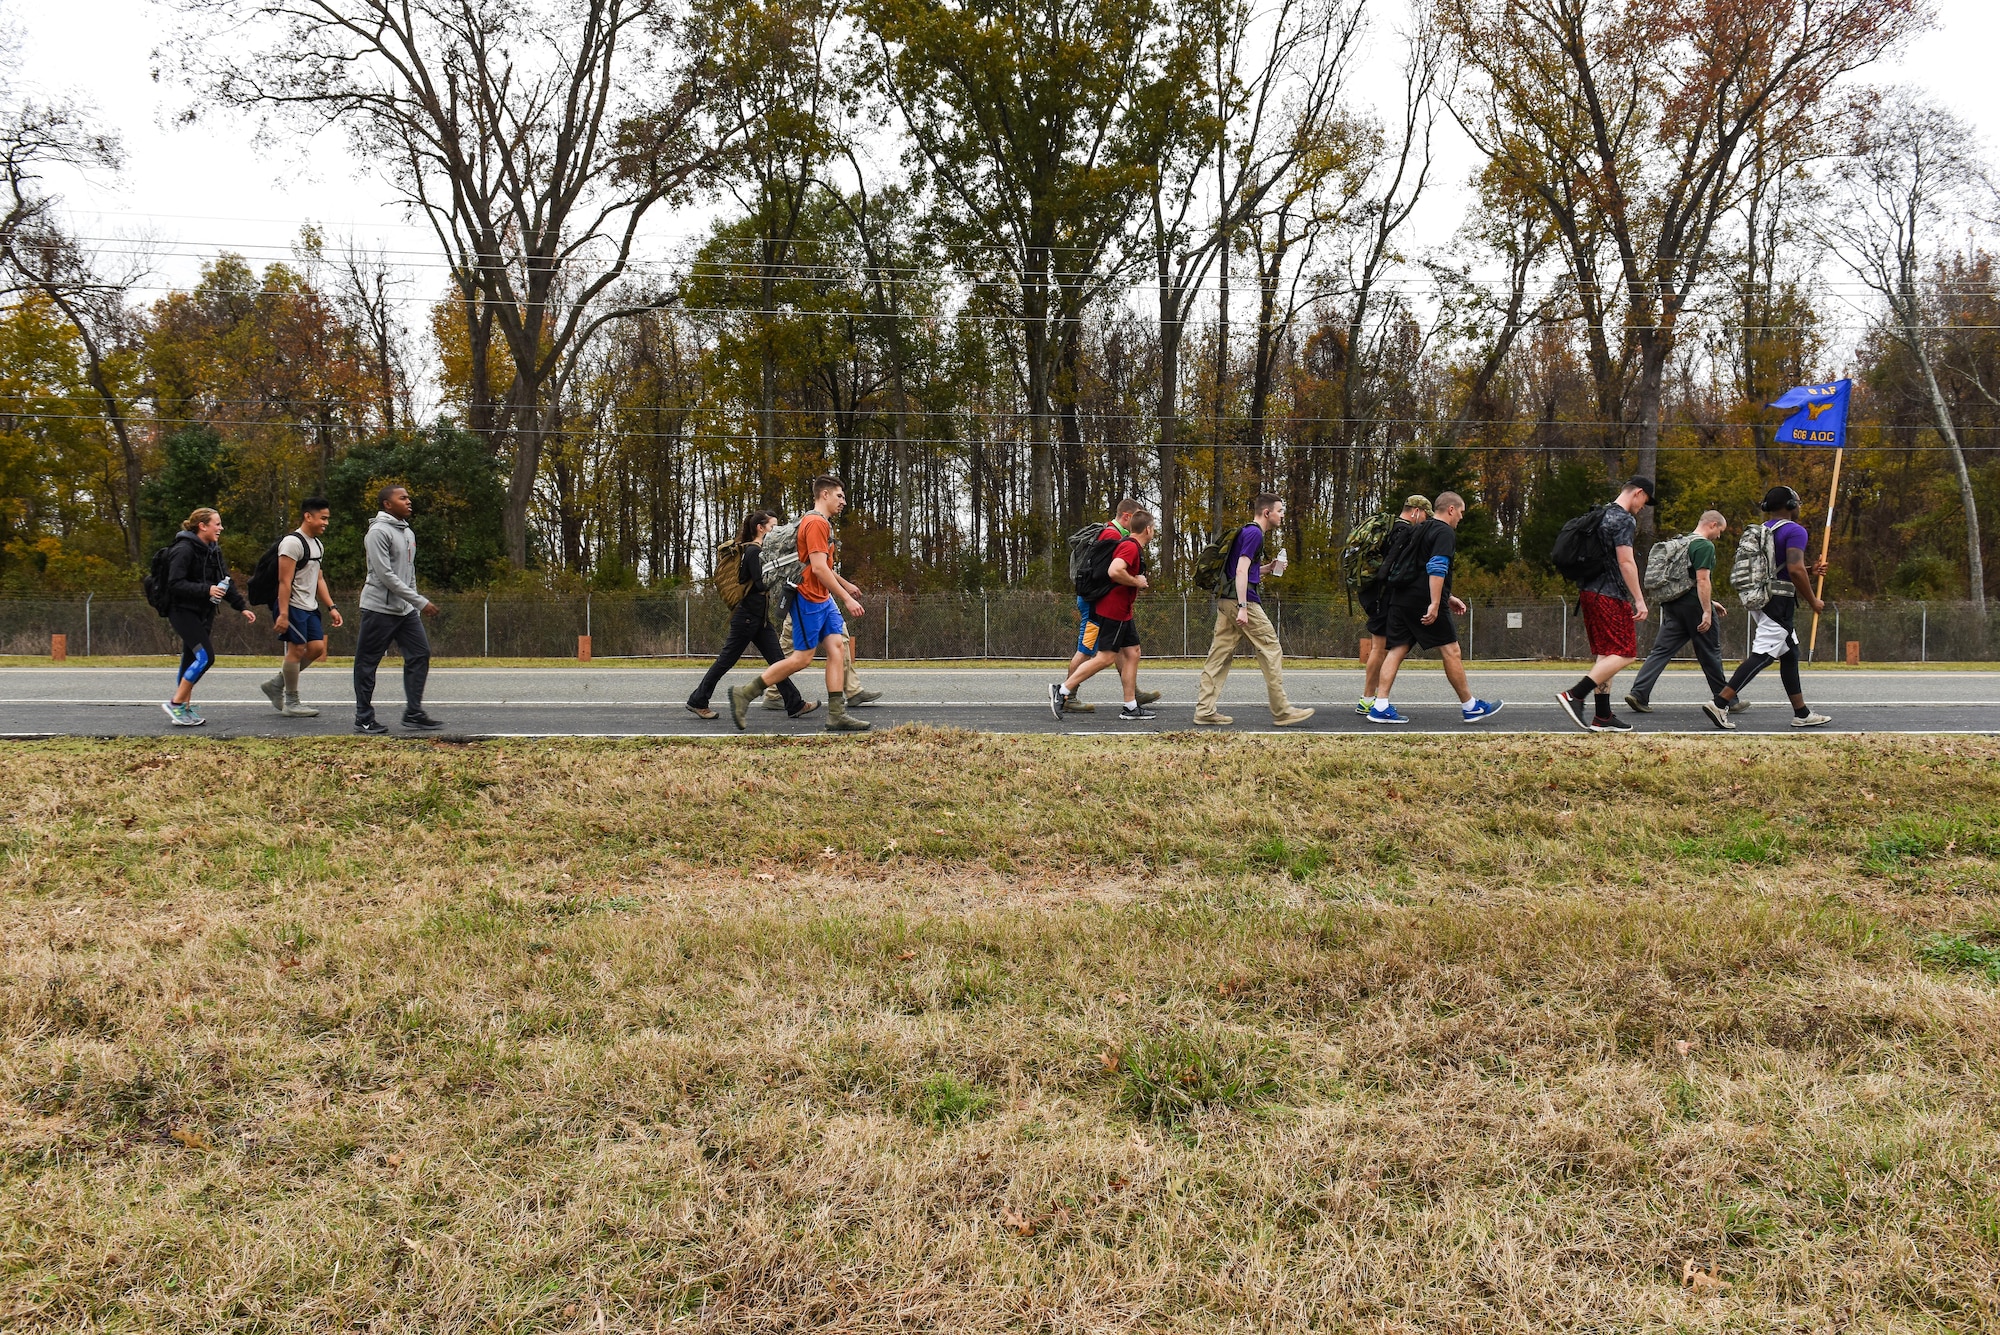 Airmen assigned to the 608th Air Operations Center participate in a ruck march as part of a fitness program capstone event at Barksdale Air Force Base, La., Dec. 12, 2016. The advanced PT program is intended to encourage habitual fitness, boost morale and serve as an initiative to seeking out new fitness regimes. (U.S. Air Force photo by Senior Airman Luke Hill) 